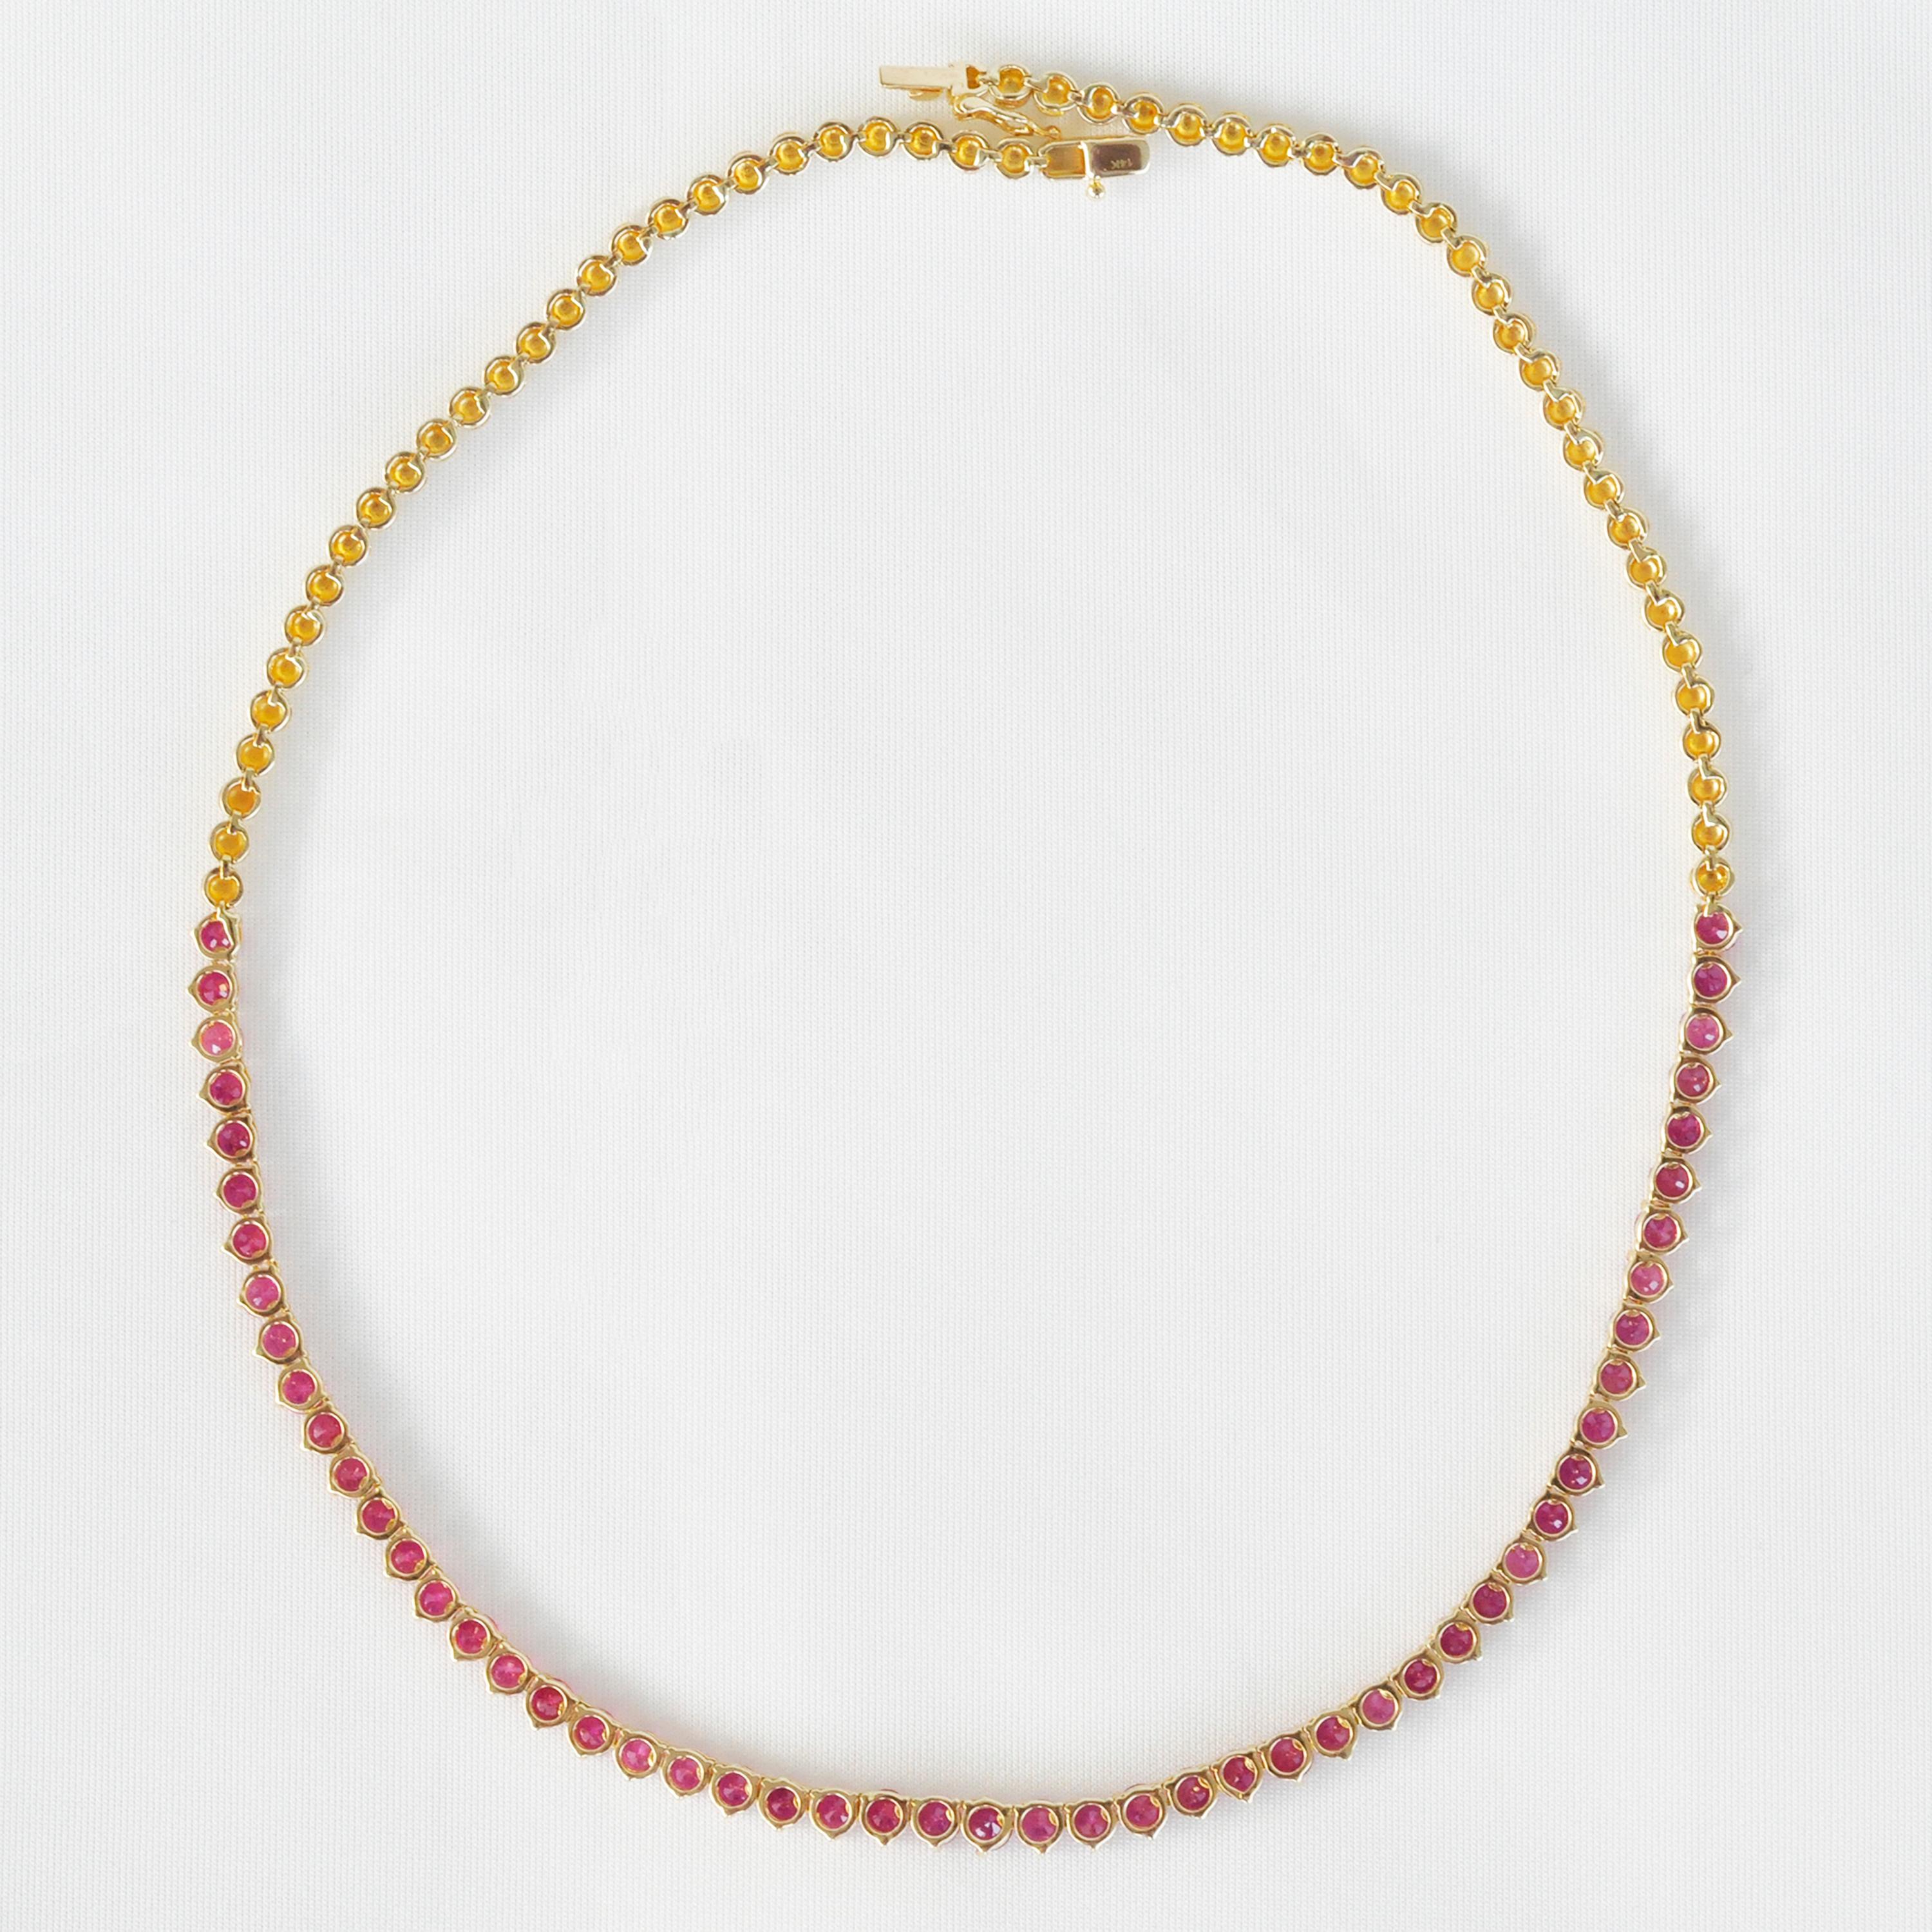 Contemporary 14.41 Carats Natural Round Ruby 14 Karat Yellow Gold Tennis Link Necklace